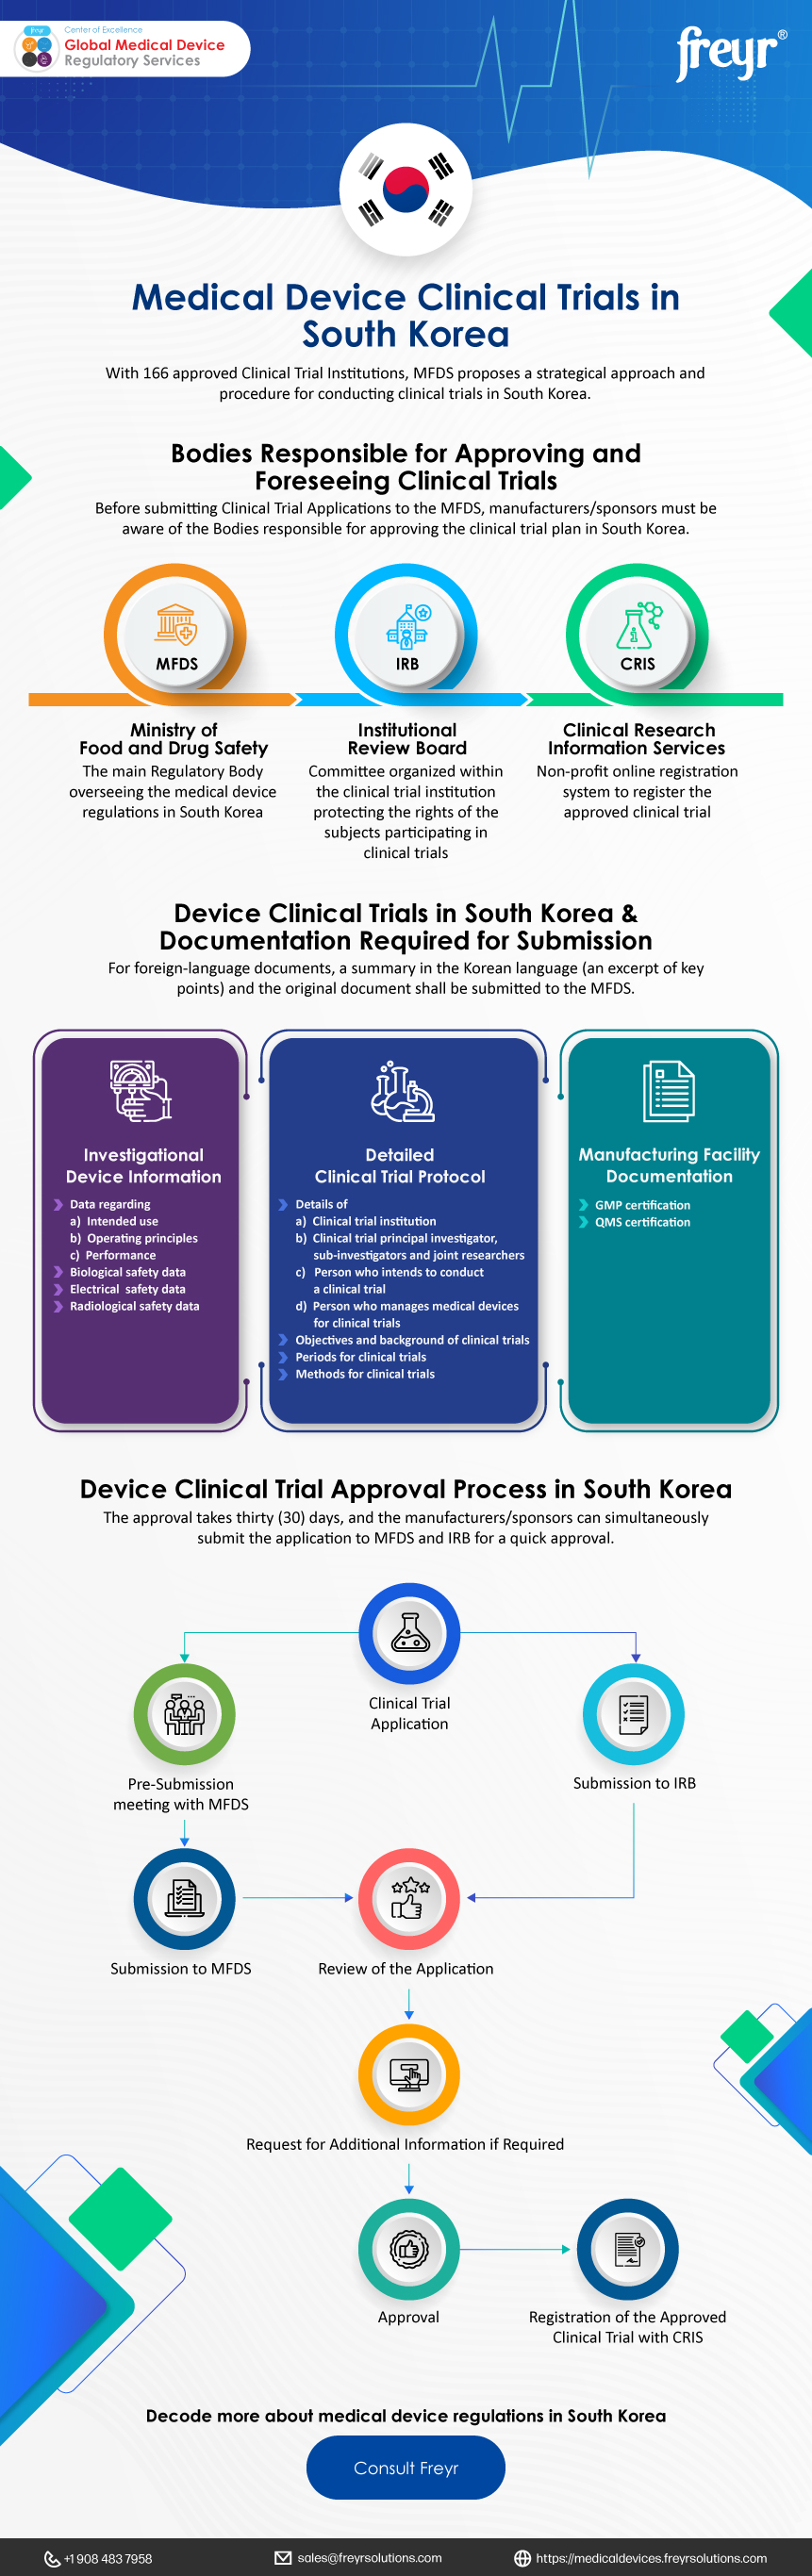 Medical Device Clinical Trials in South Korea